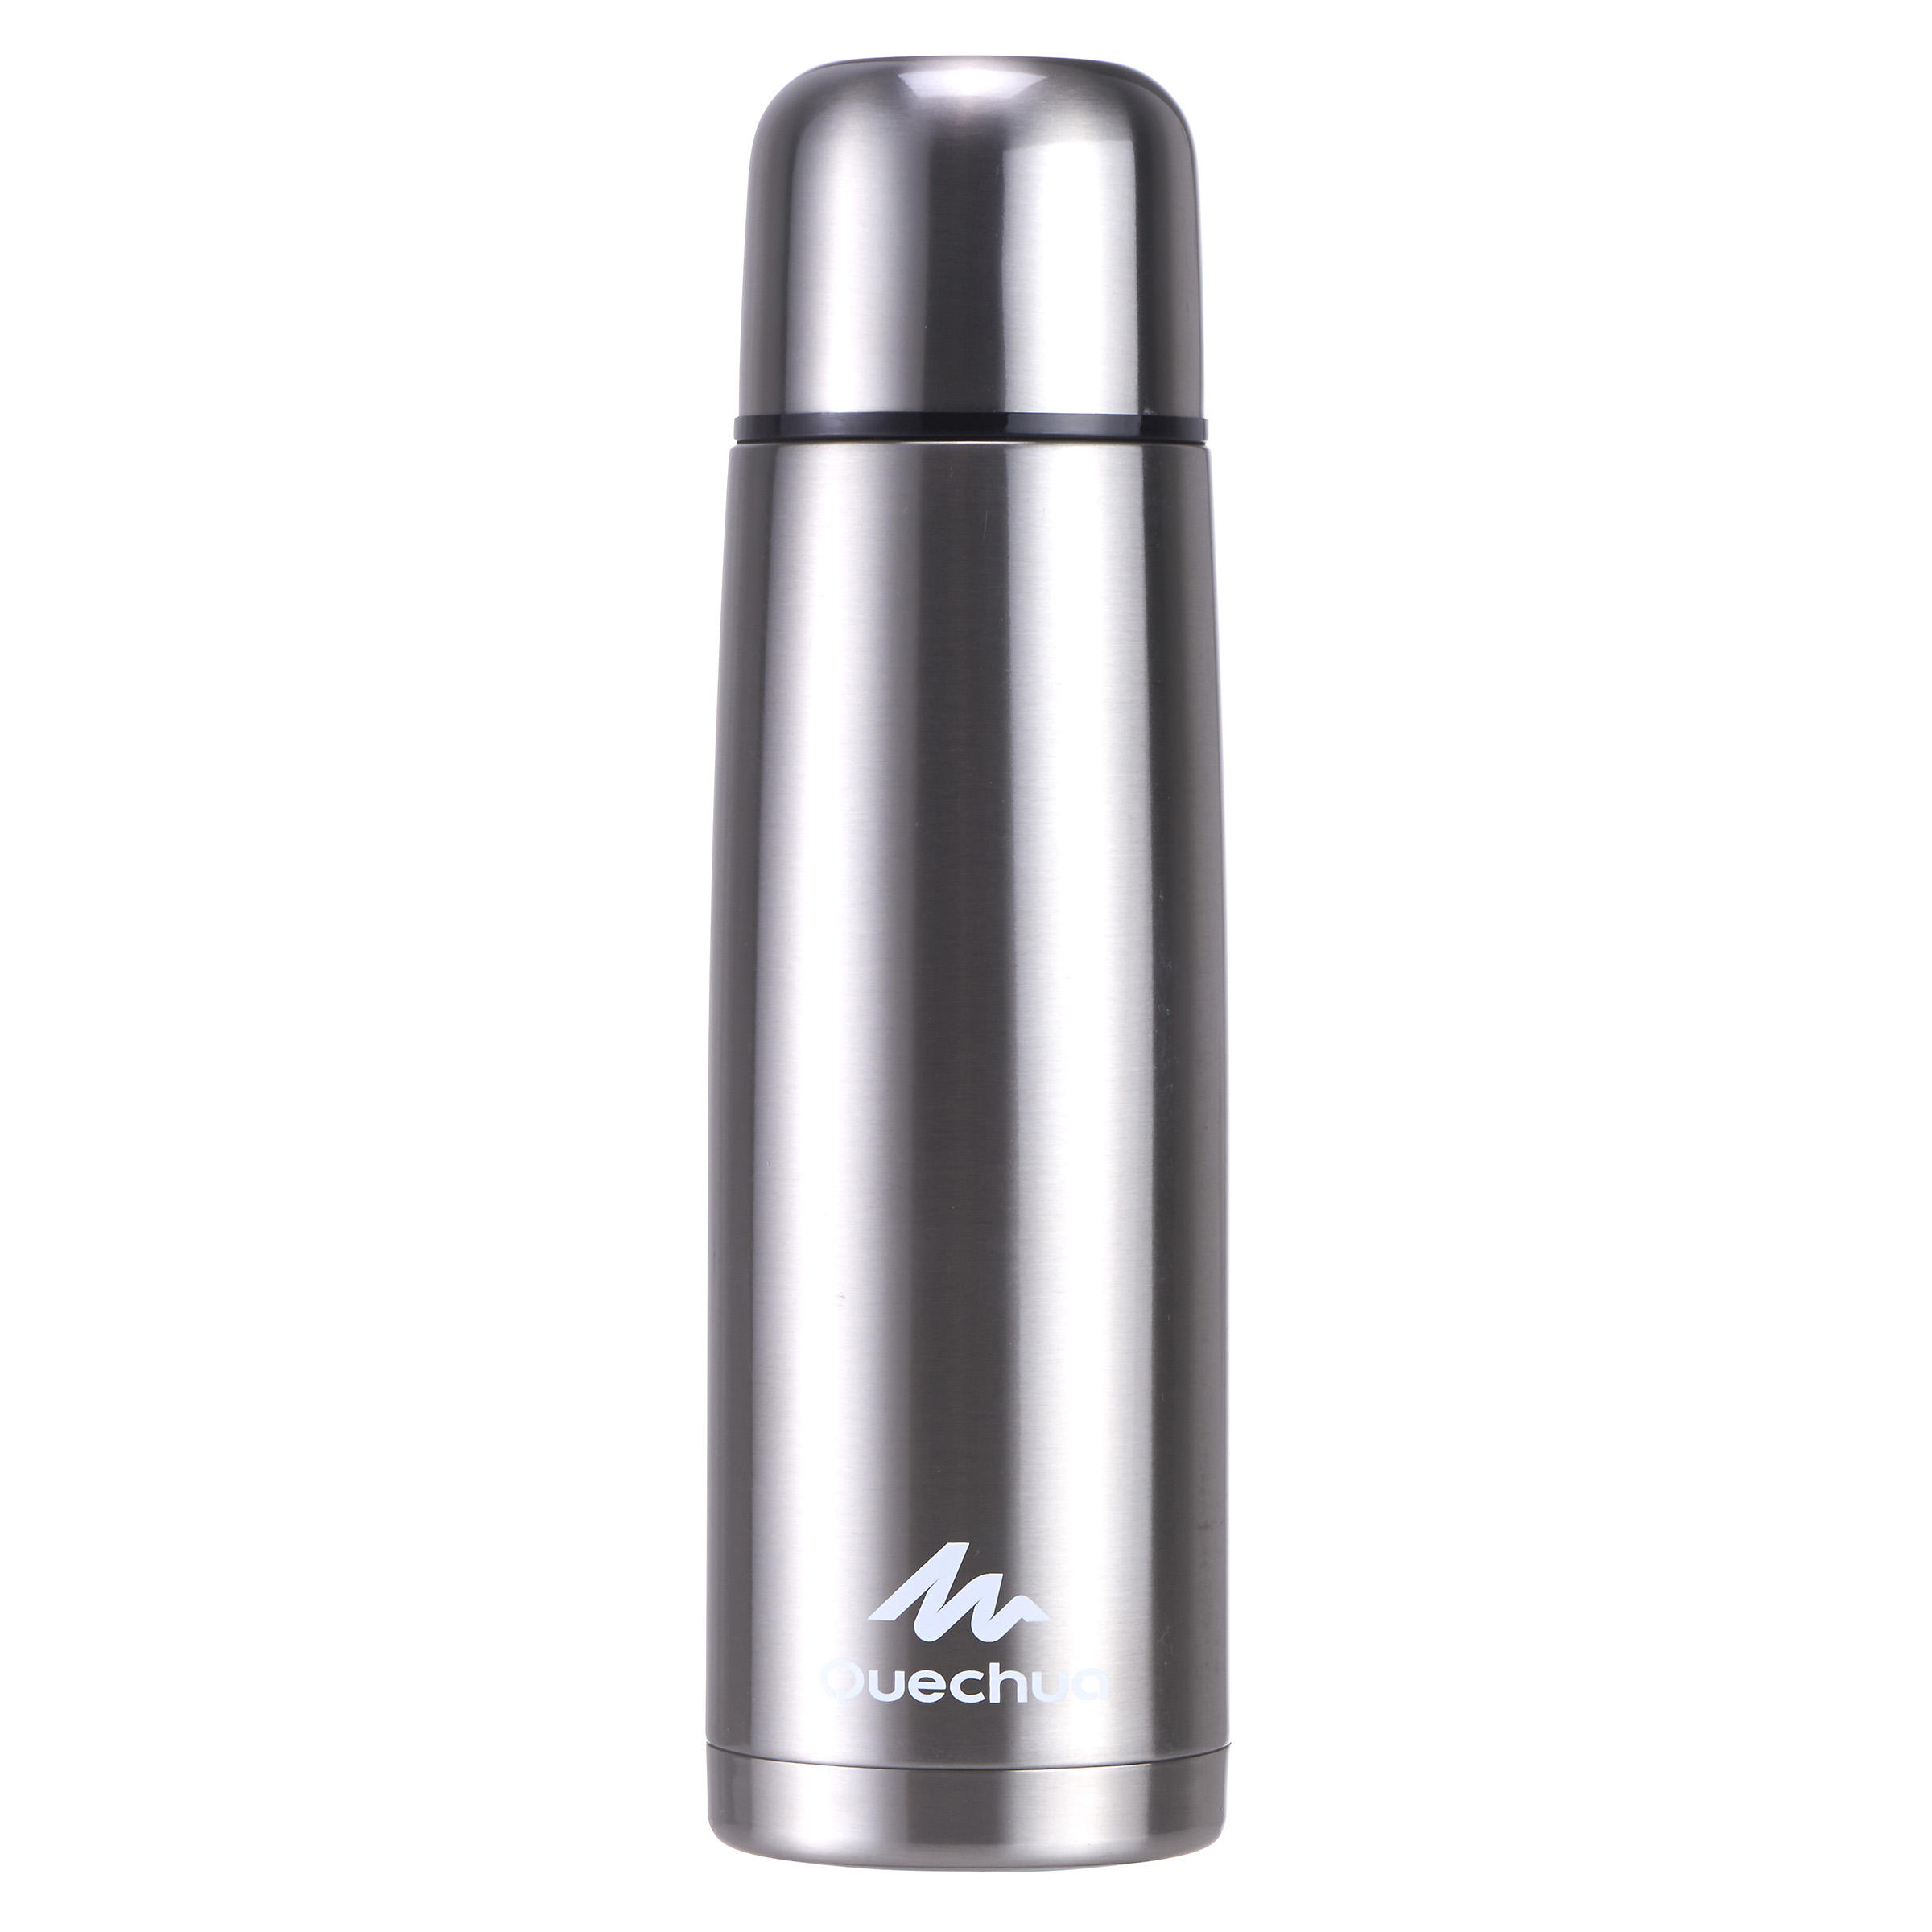 QUECHUA 1 L stainless steel isothermal water bottle with cup for hiking - Silver